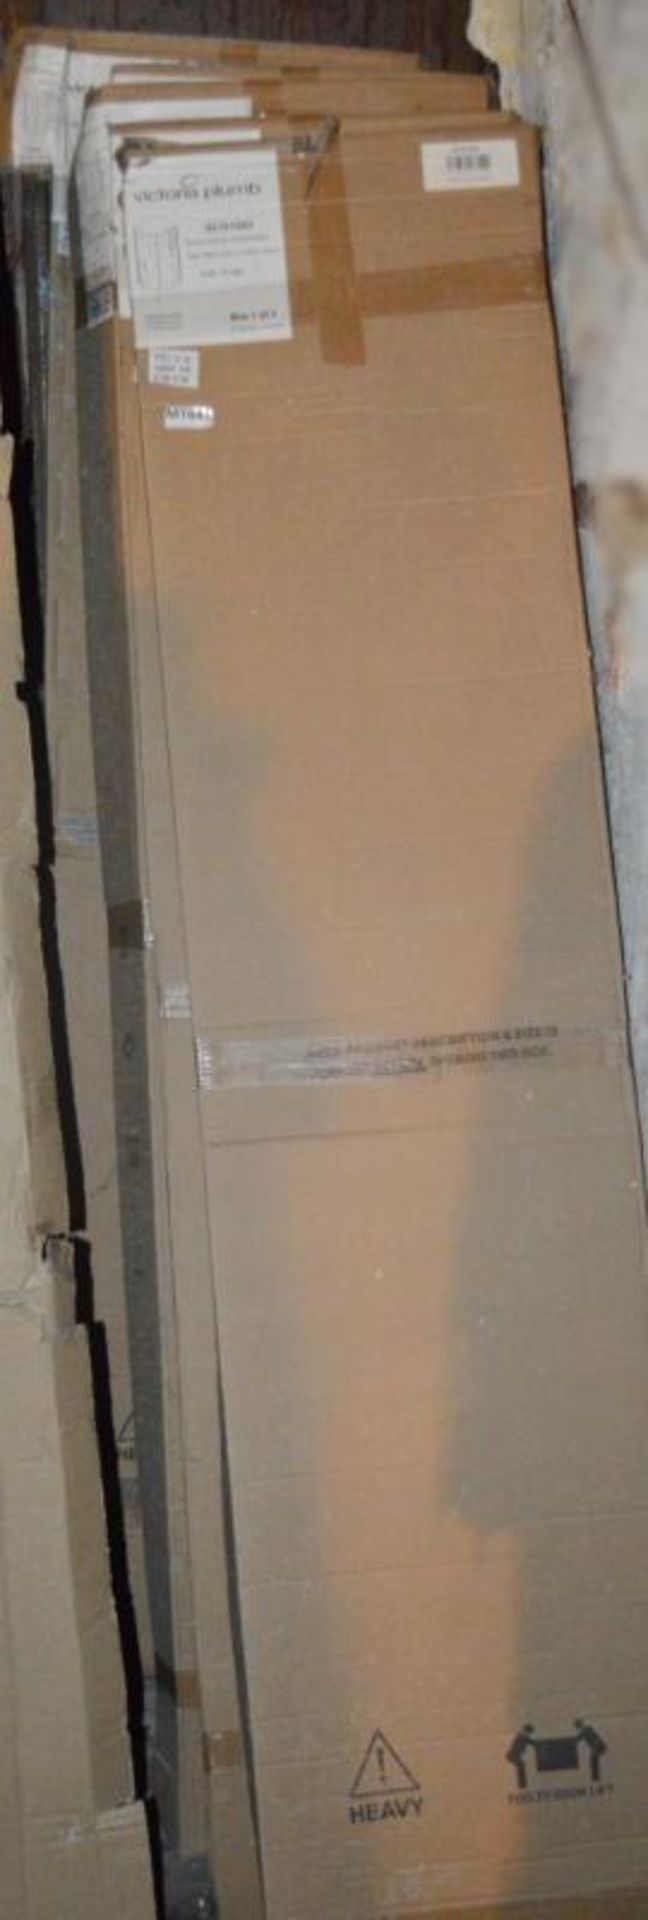 11 x Assorted Shower Screens And Panels - Ref 226 / Ref 641 - New / Unused Boxed Stock - CL269 - Loc - Image 6 of 8